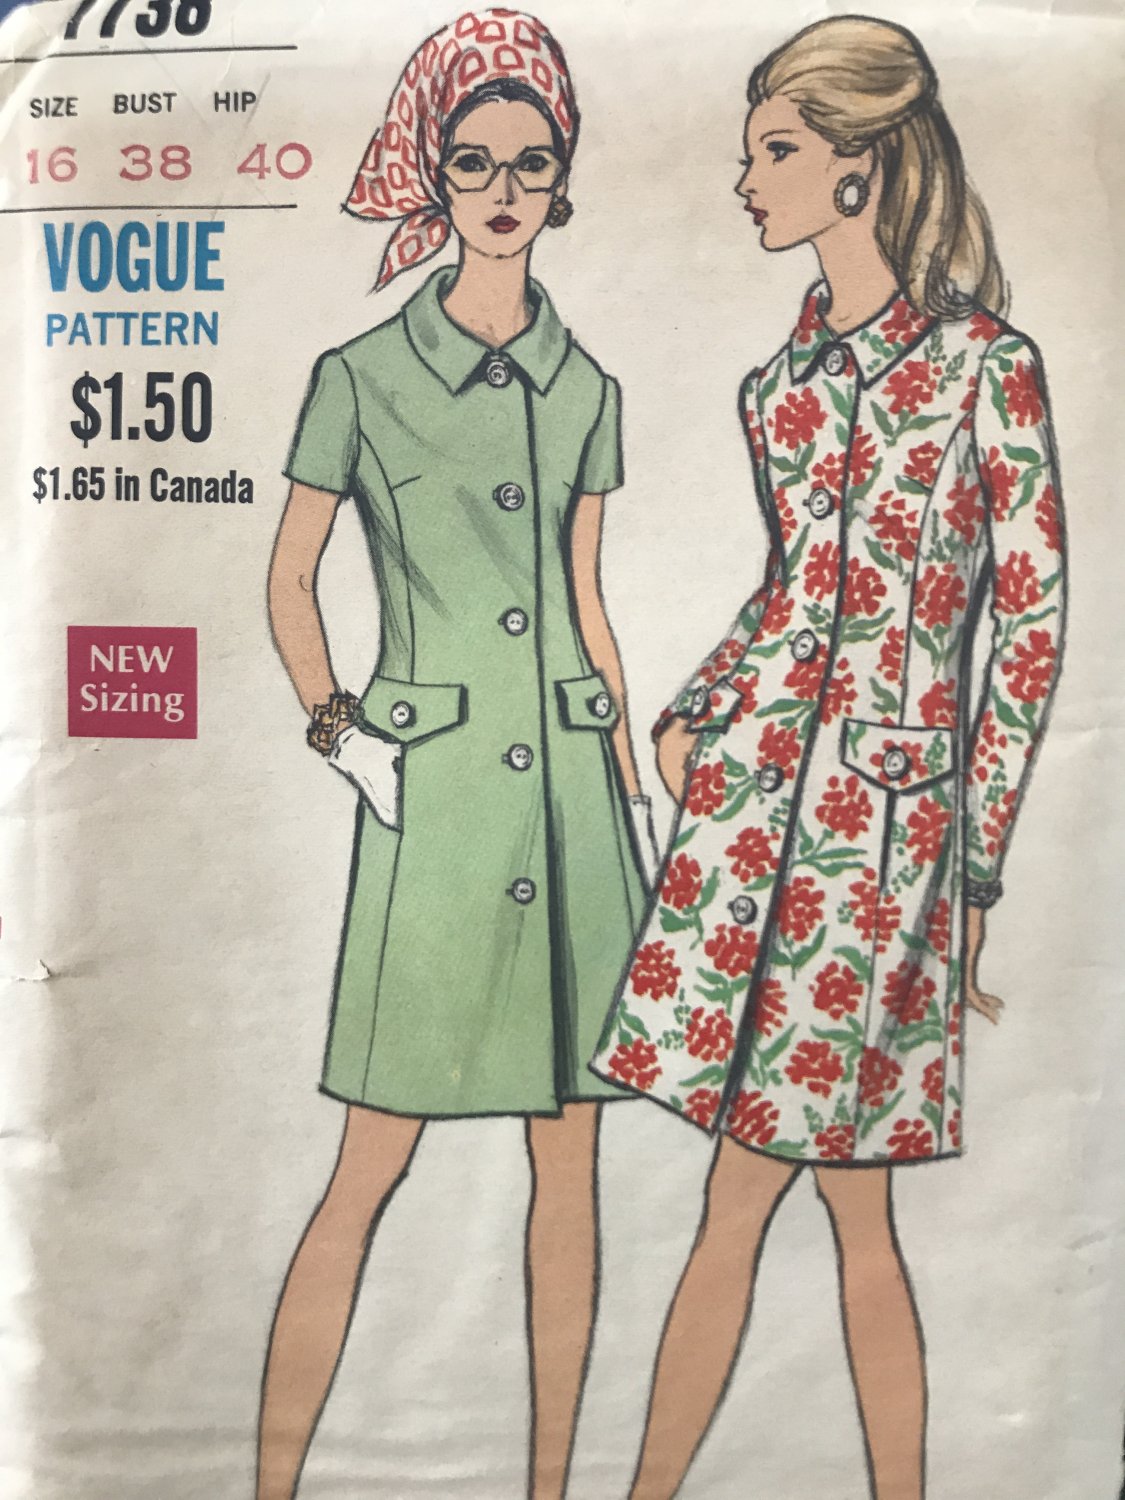 Vogue 7738 Misses' Semi-fitted coatdress Sewing Pattern size 16